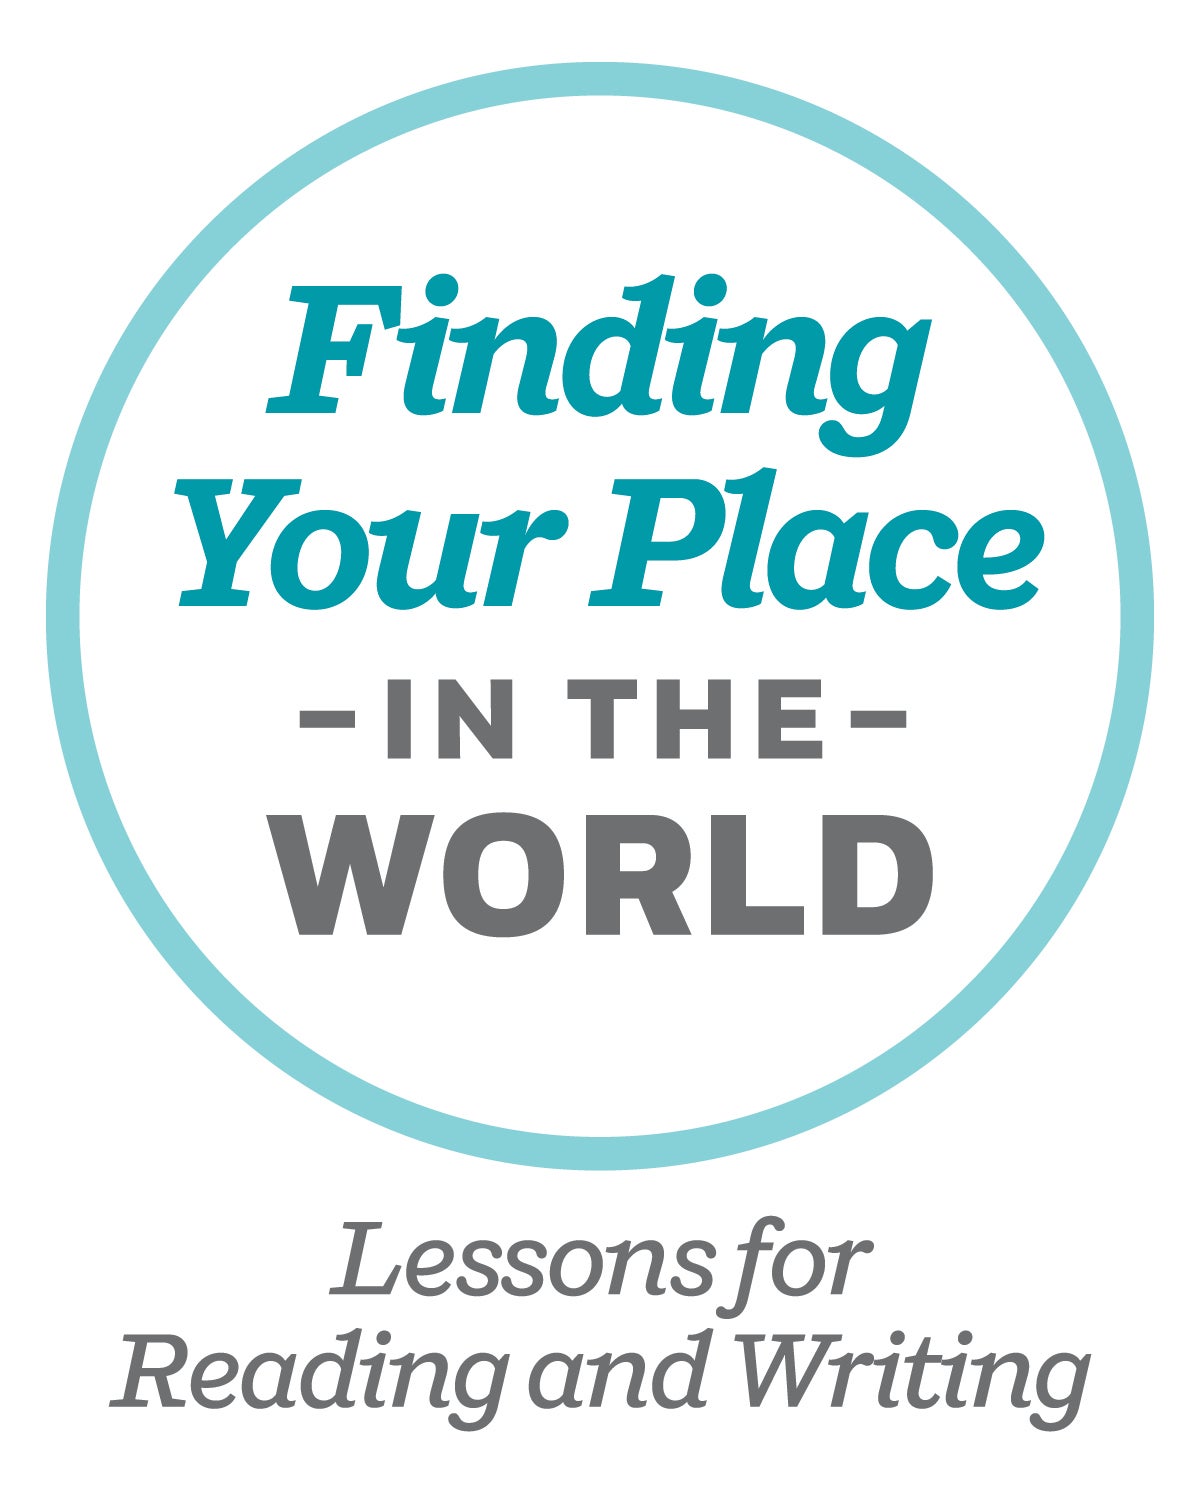 Finding Your Place in the World: Lessons for Reading and Writing